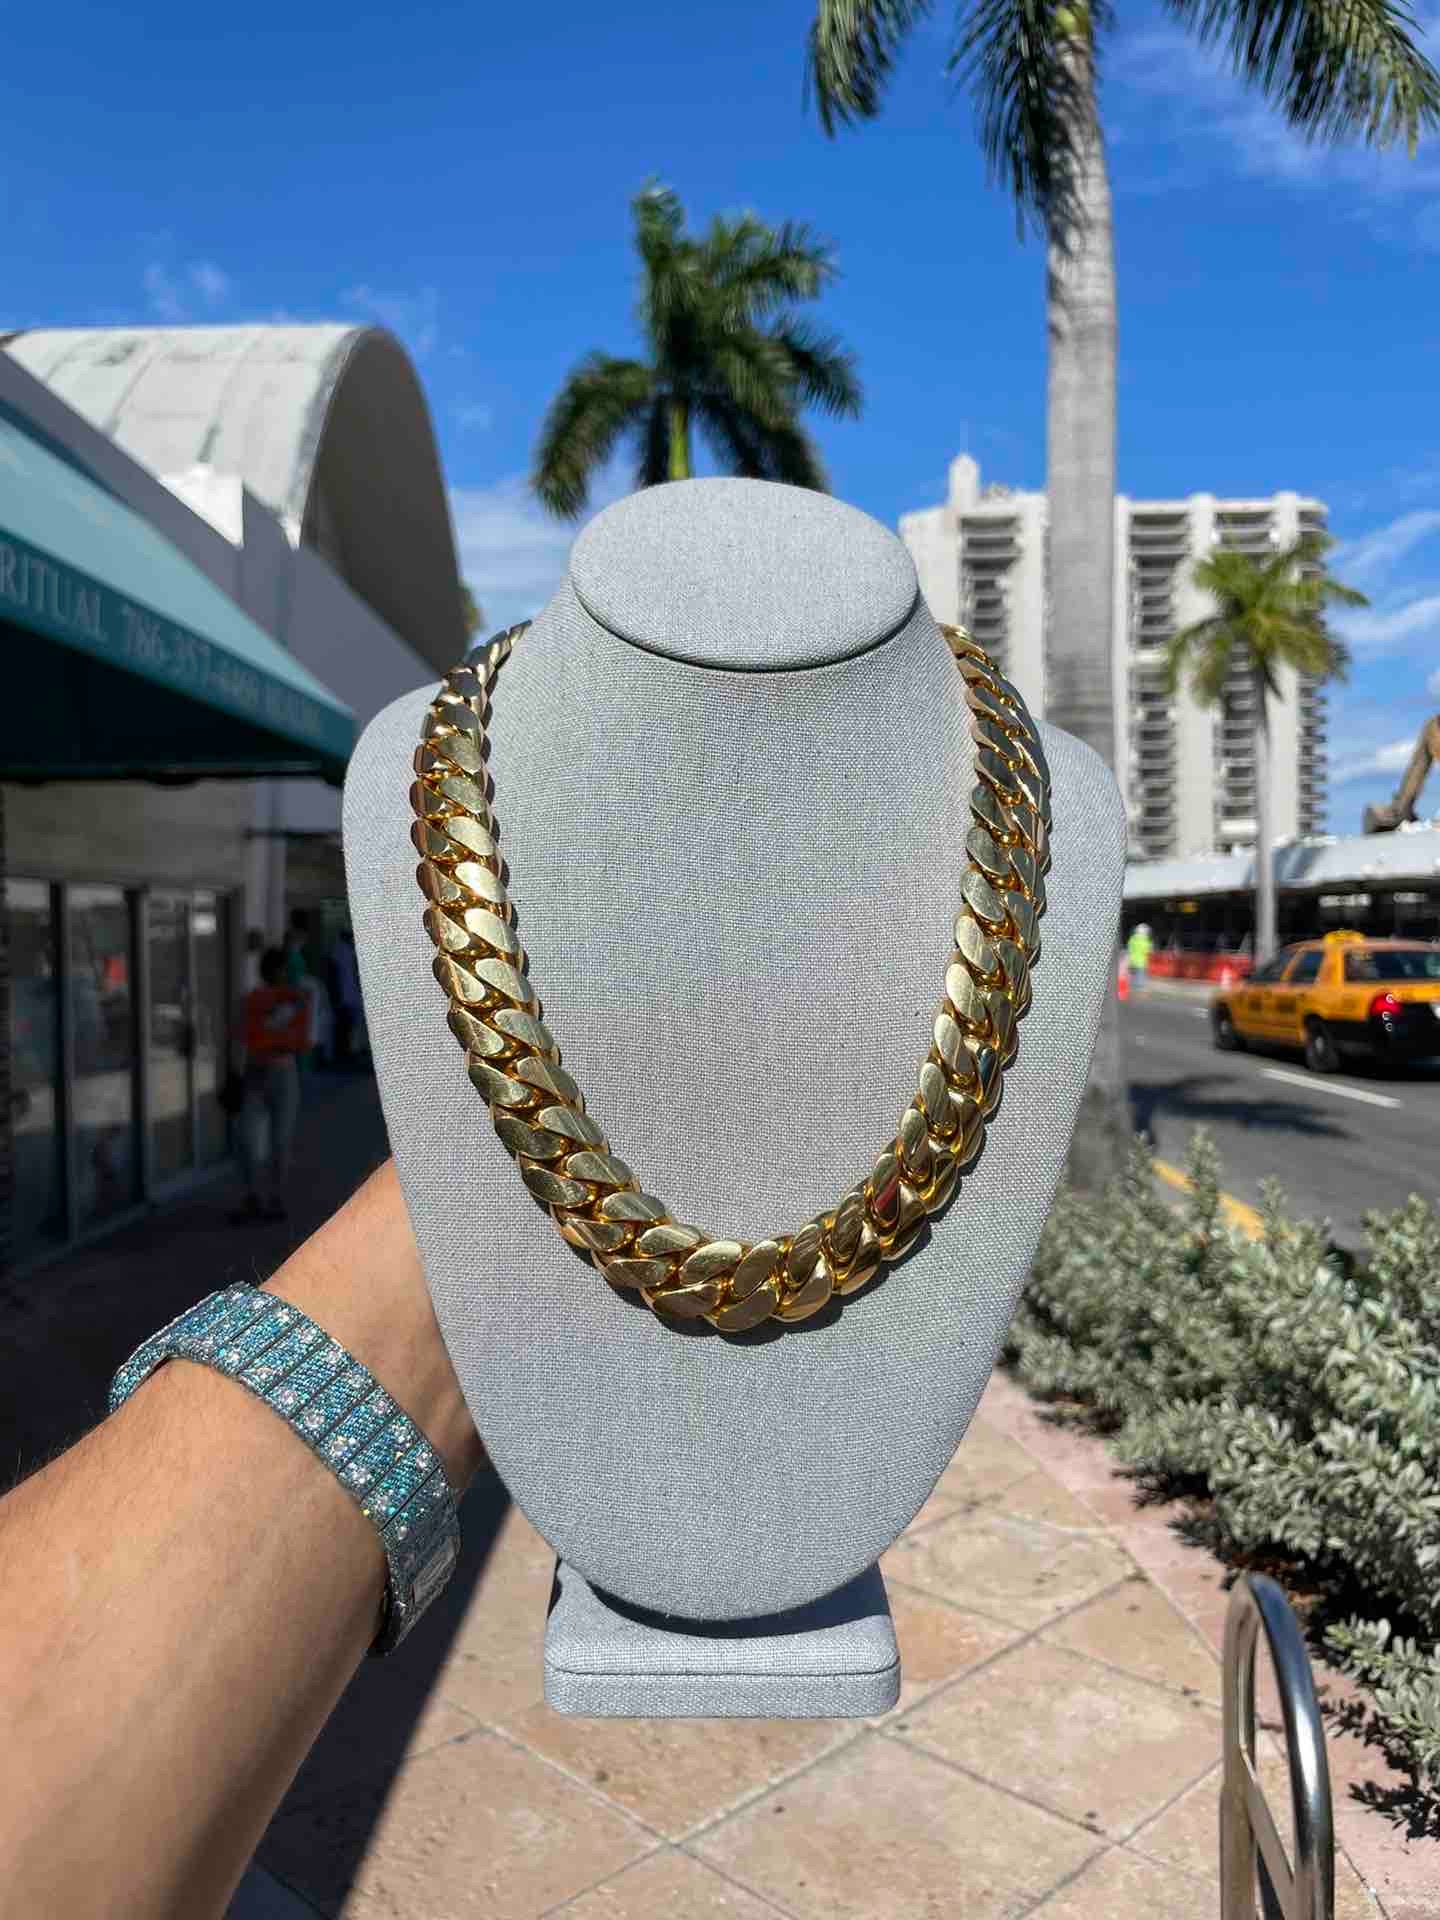 10k "HEAVY Cuban Link Chain" 560 grams  20mm  22 inches from miami beaches very own renee de paris jewelry